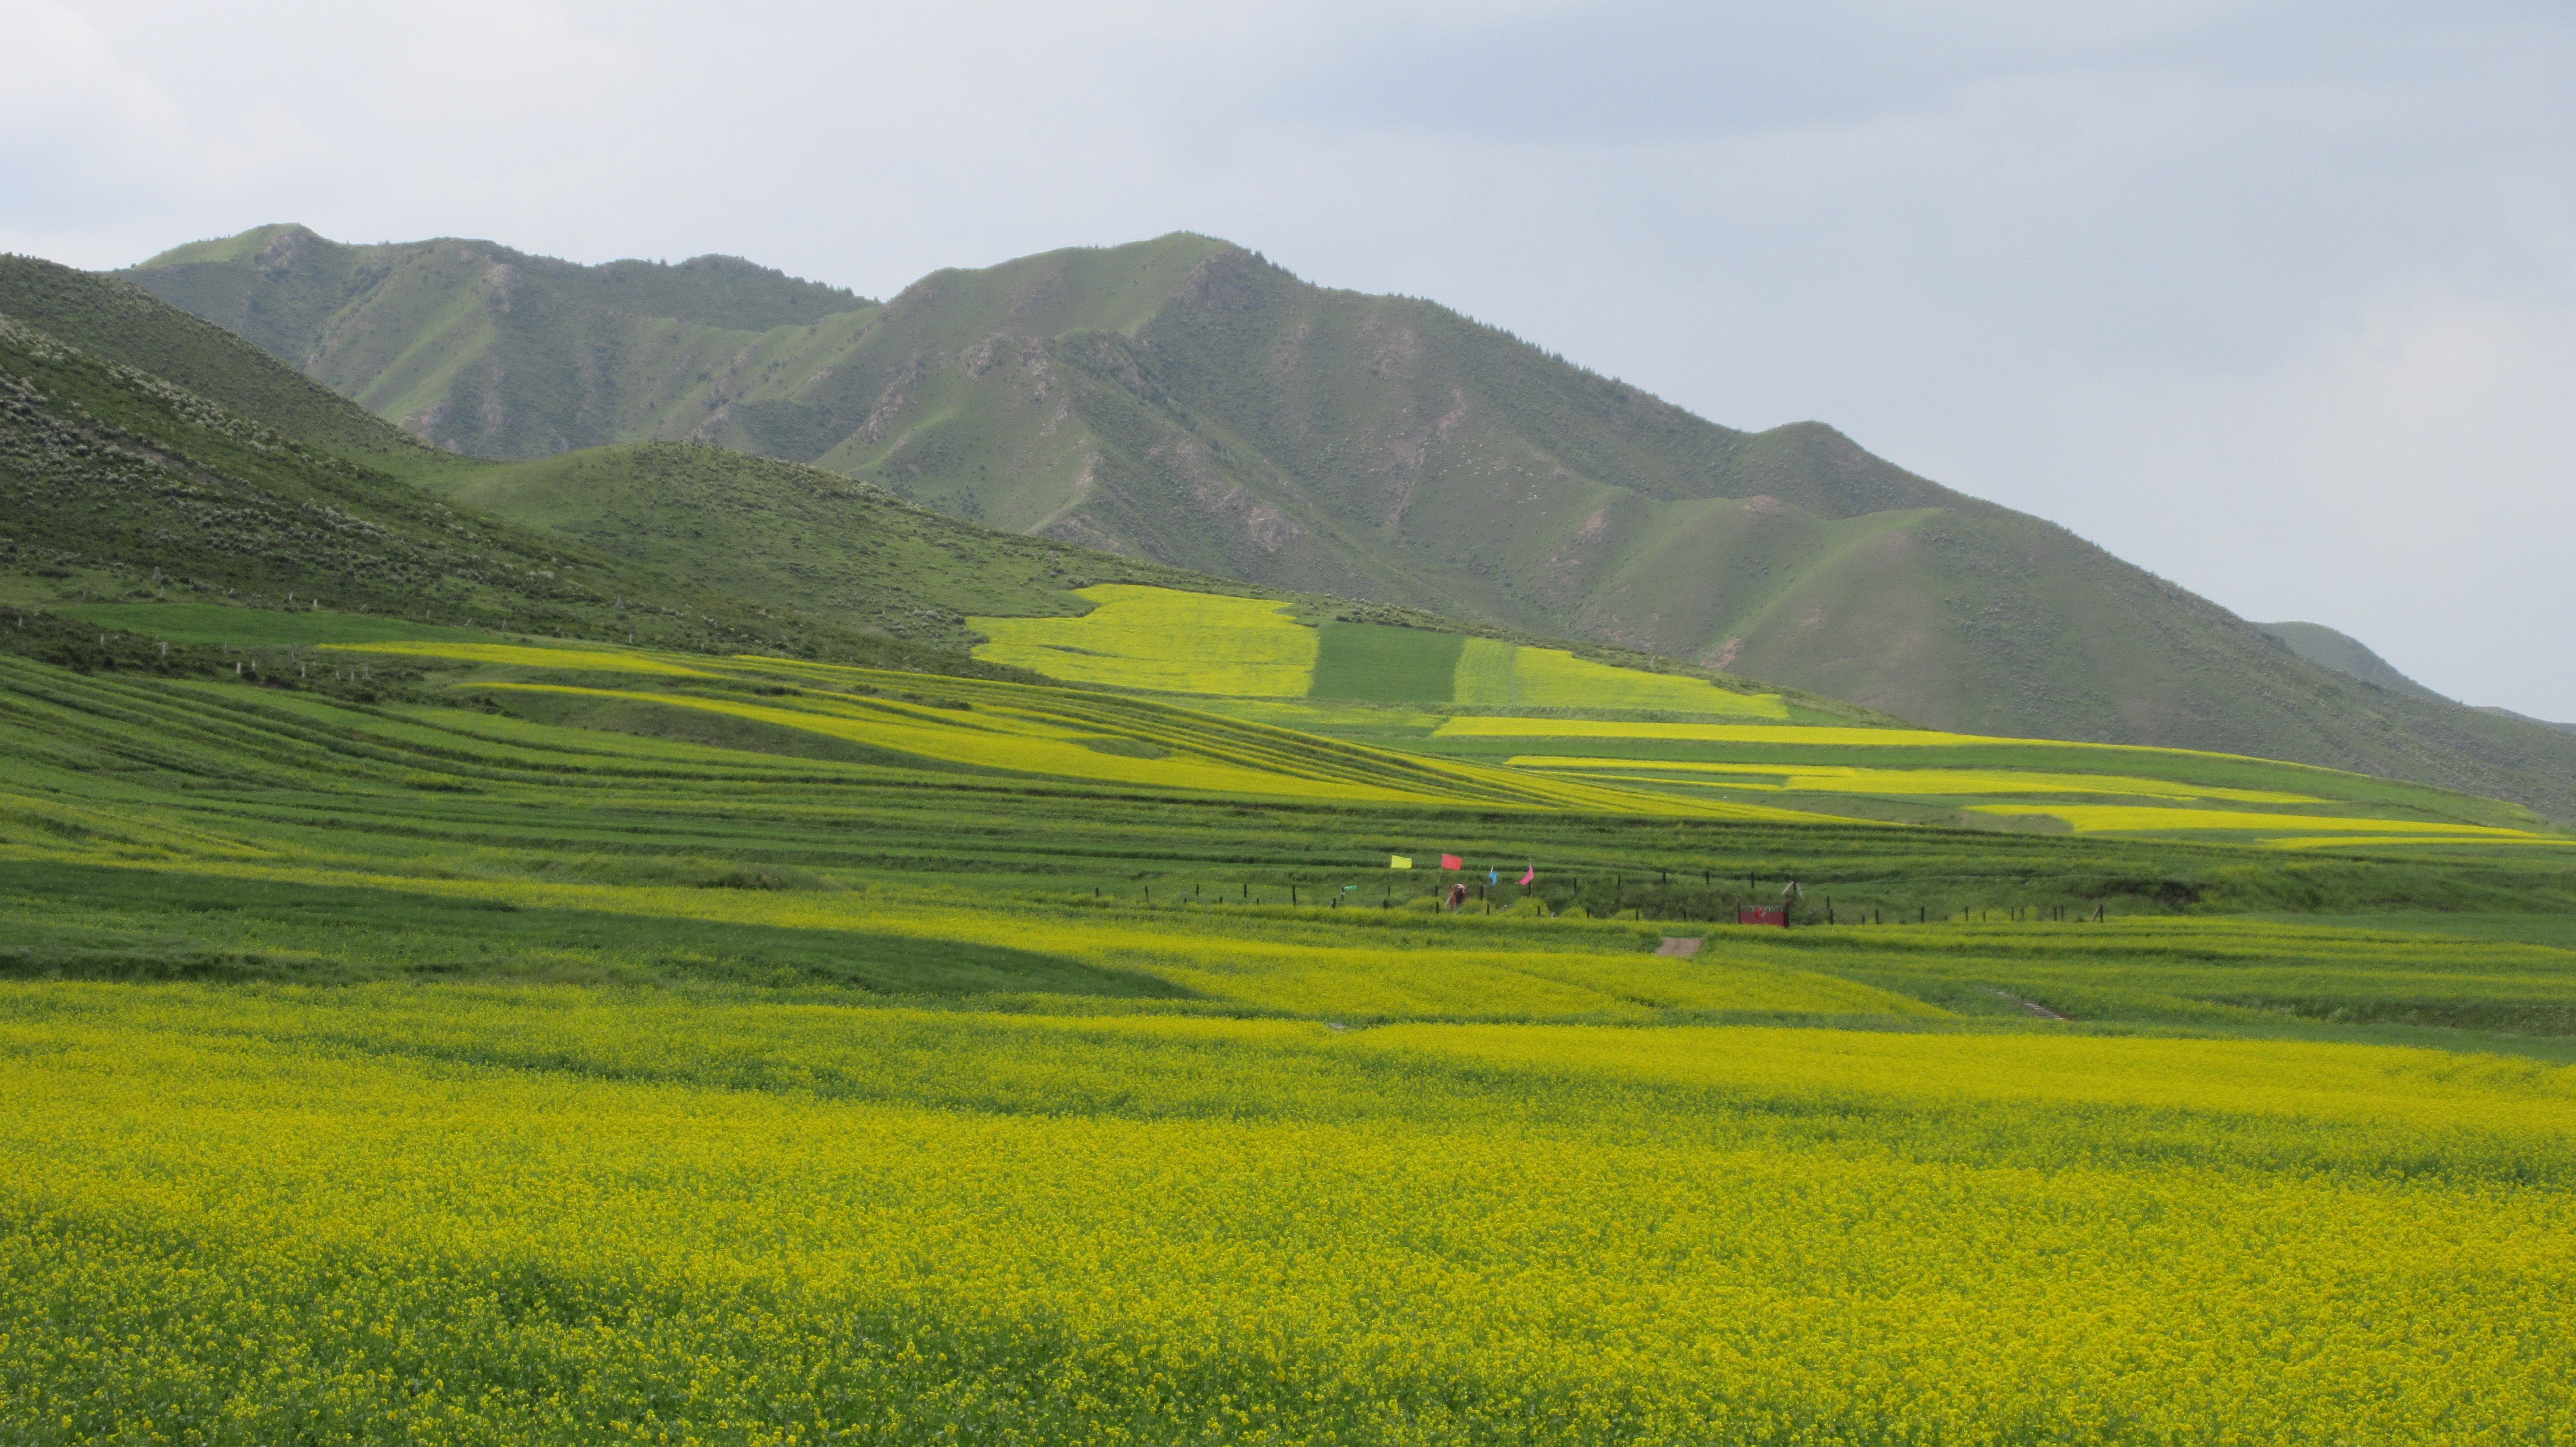 YELLOW AND GREEN. The yellow flowers complement the green rolling hills of Biandukou.
 